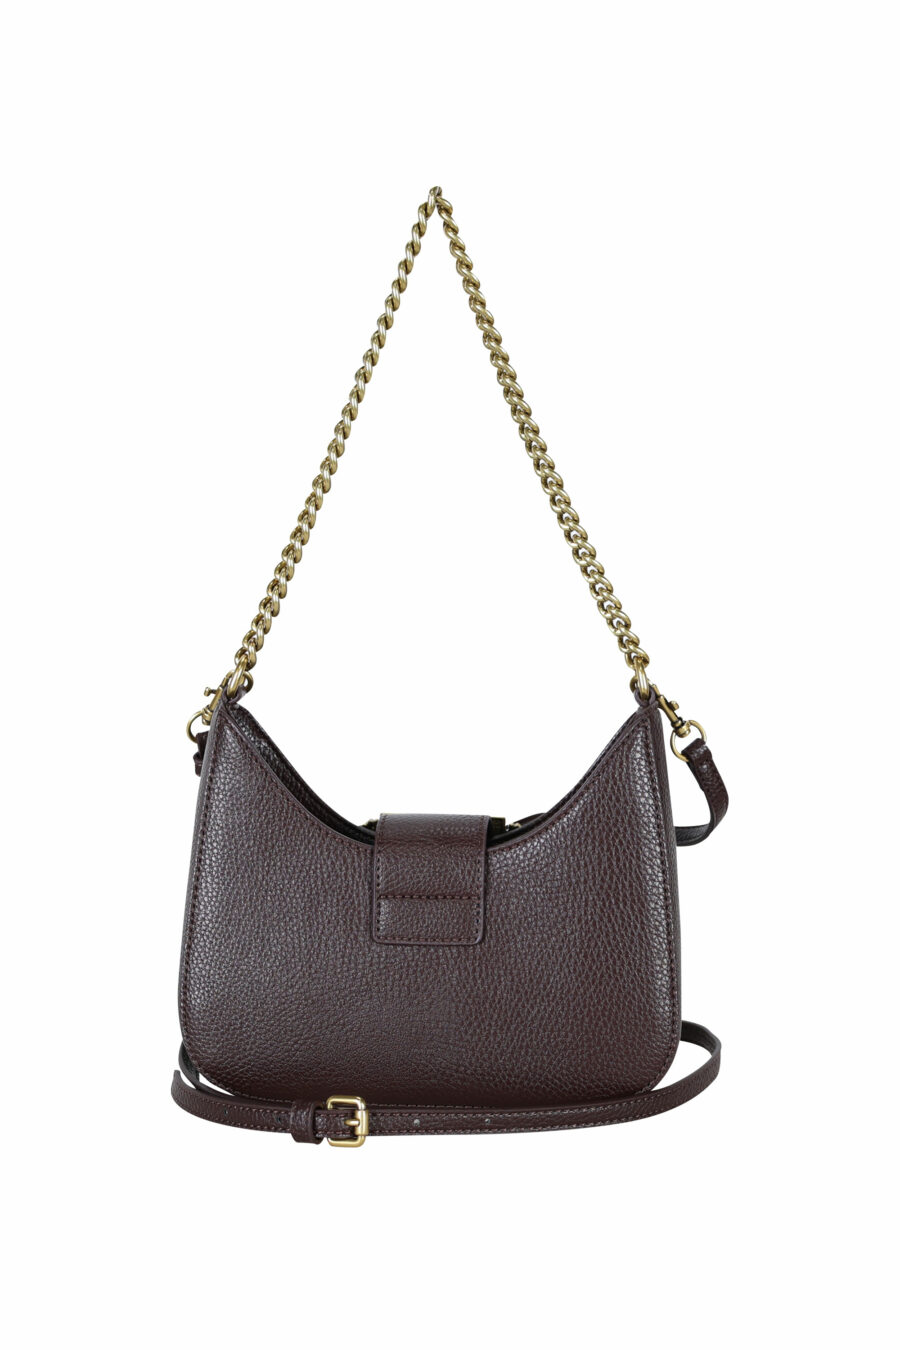 Brown hobo style shoulder bag with chain and baroque buckle - 8052019407556 2